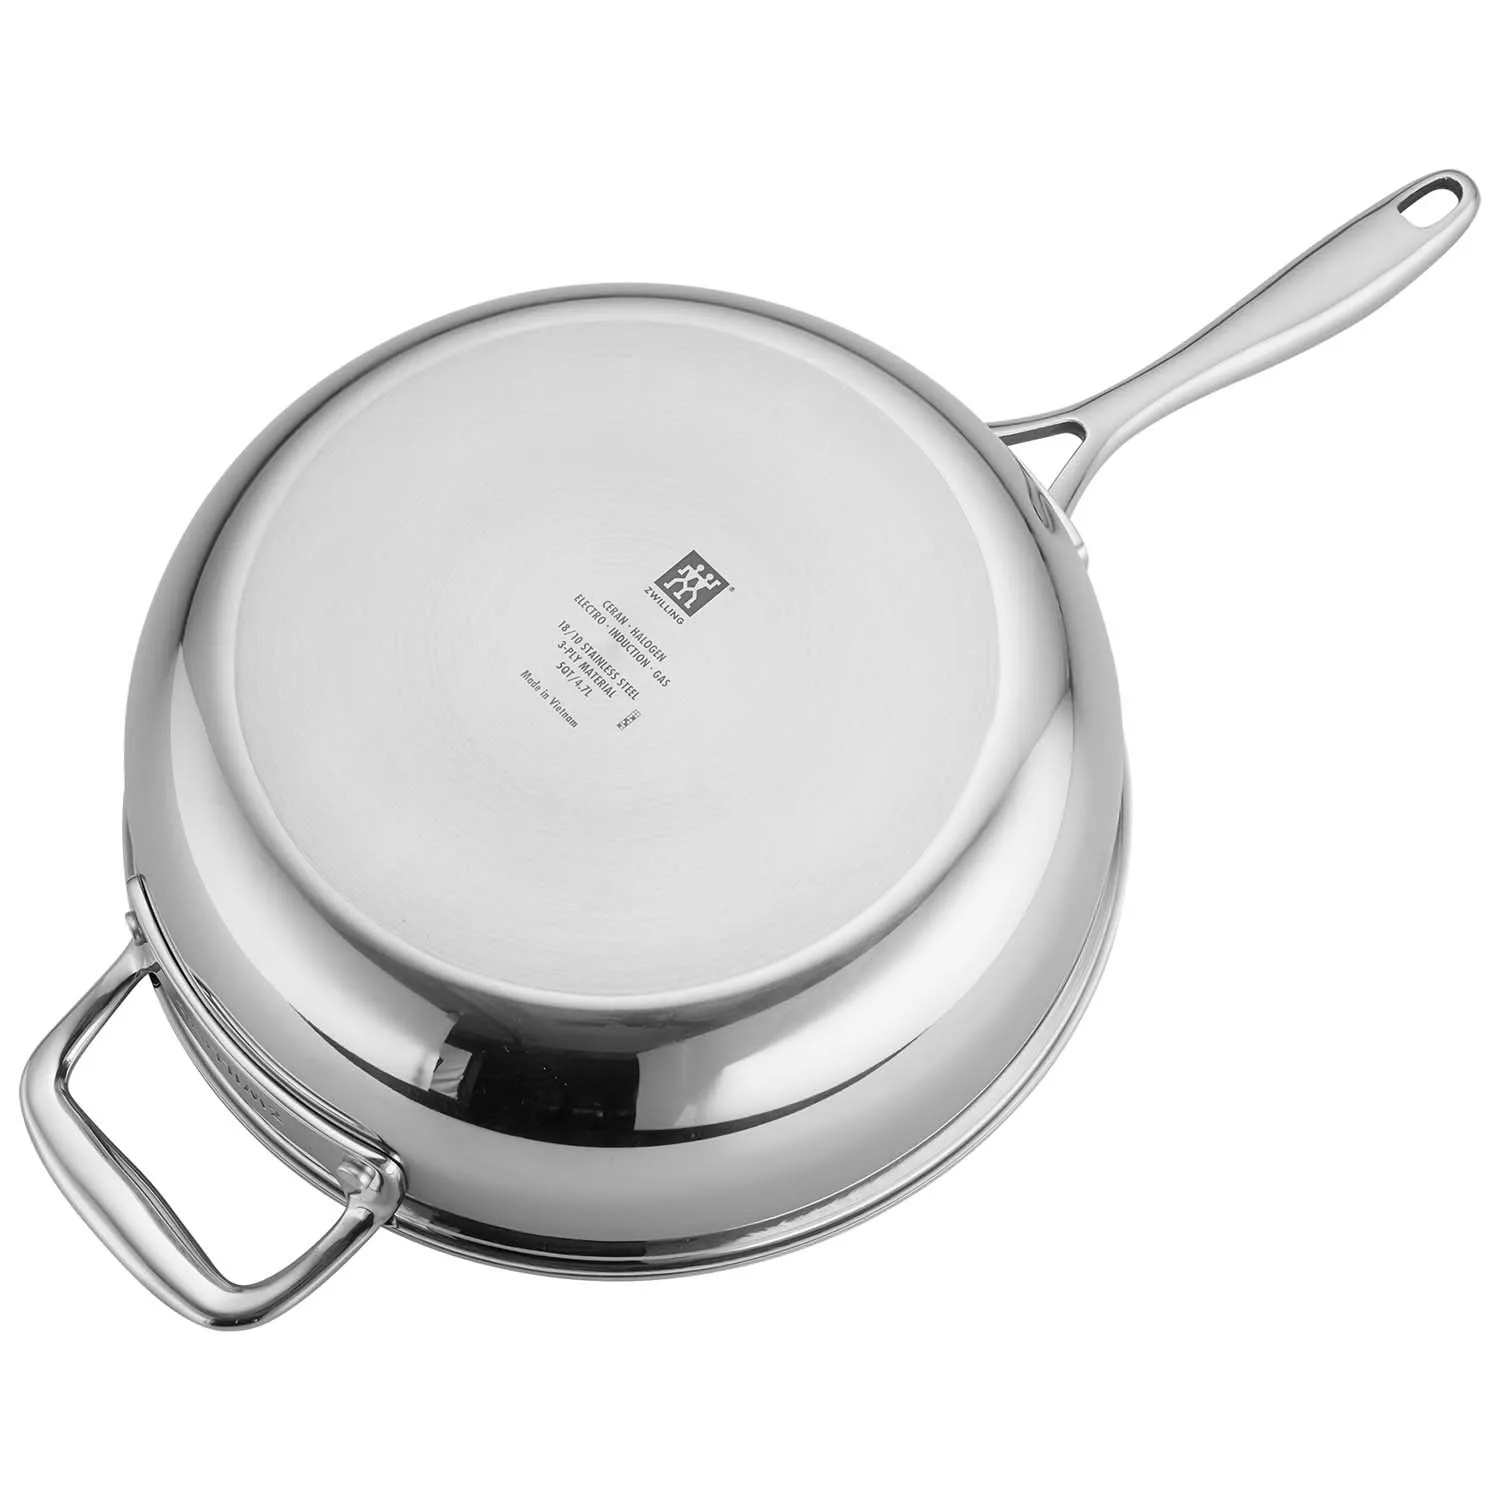 Buy ZWILLING Clad CFX Pots and pans set